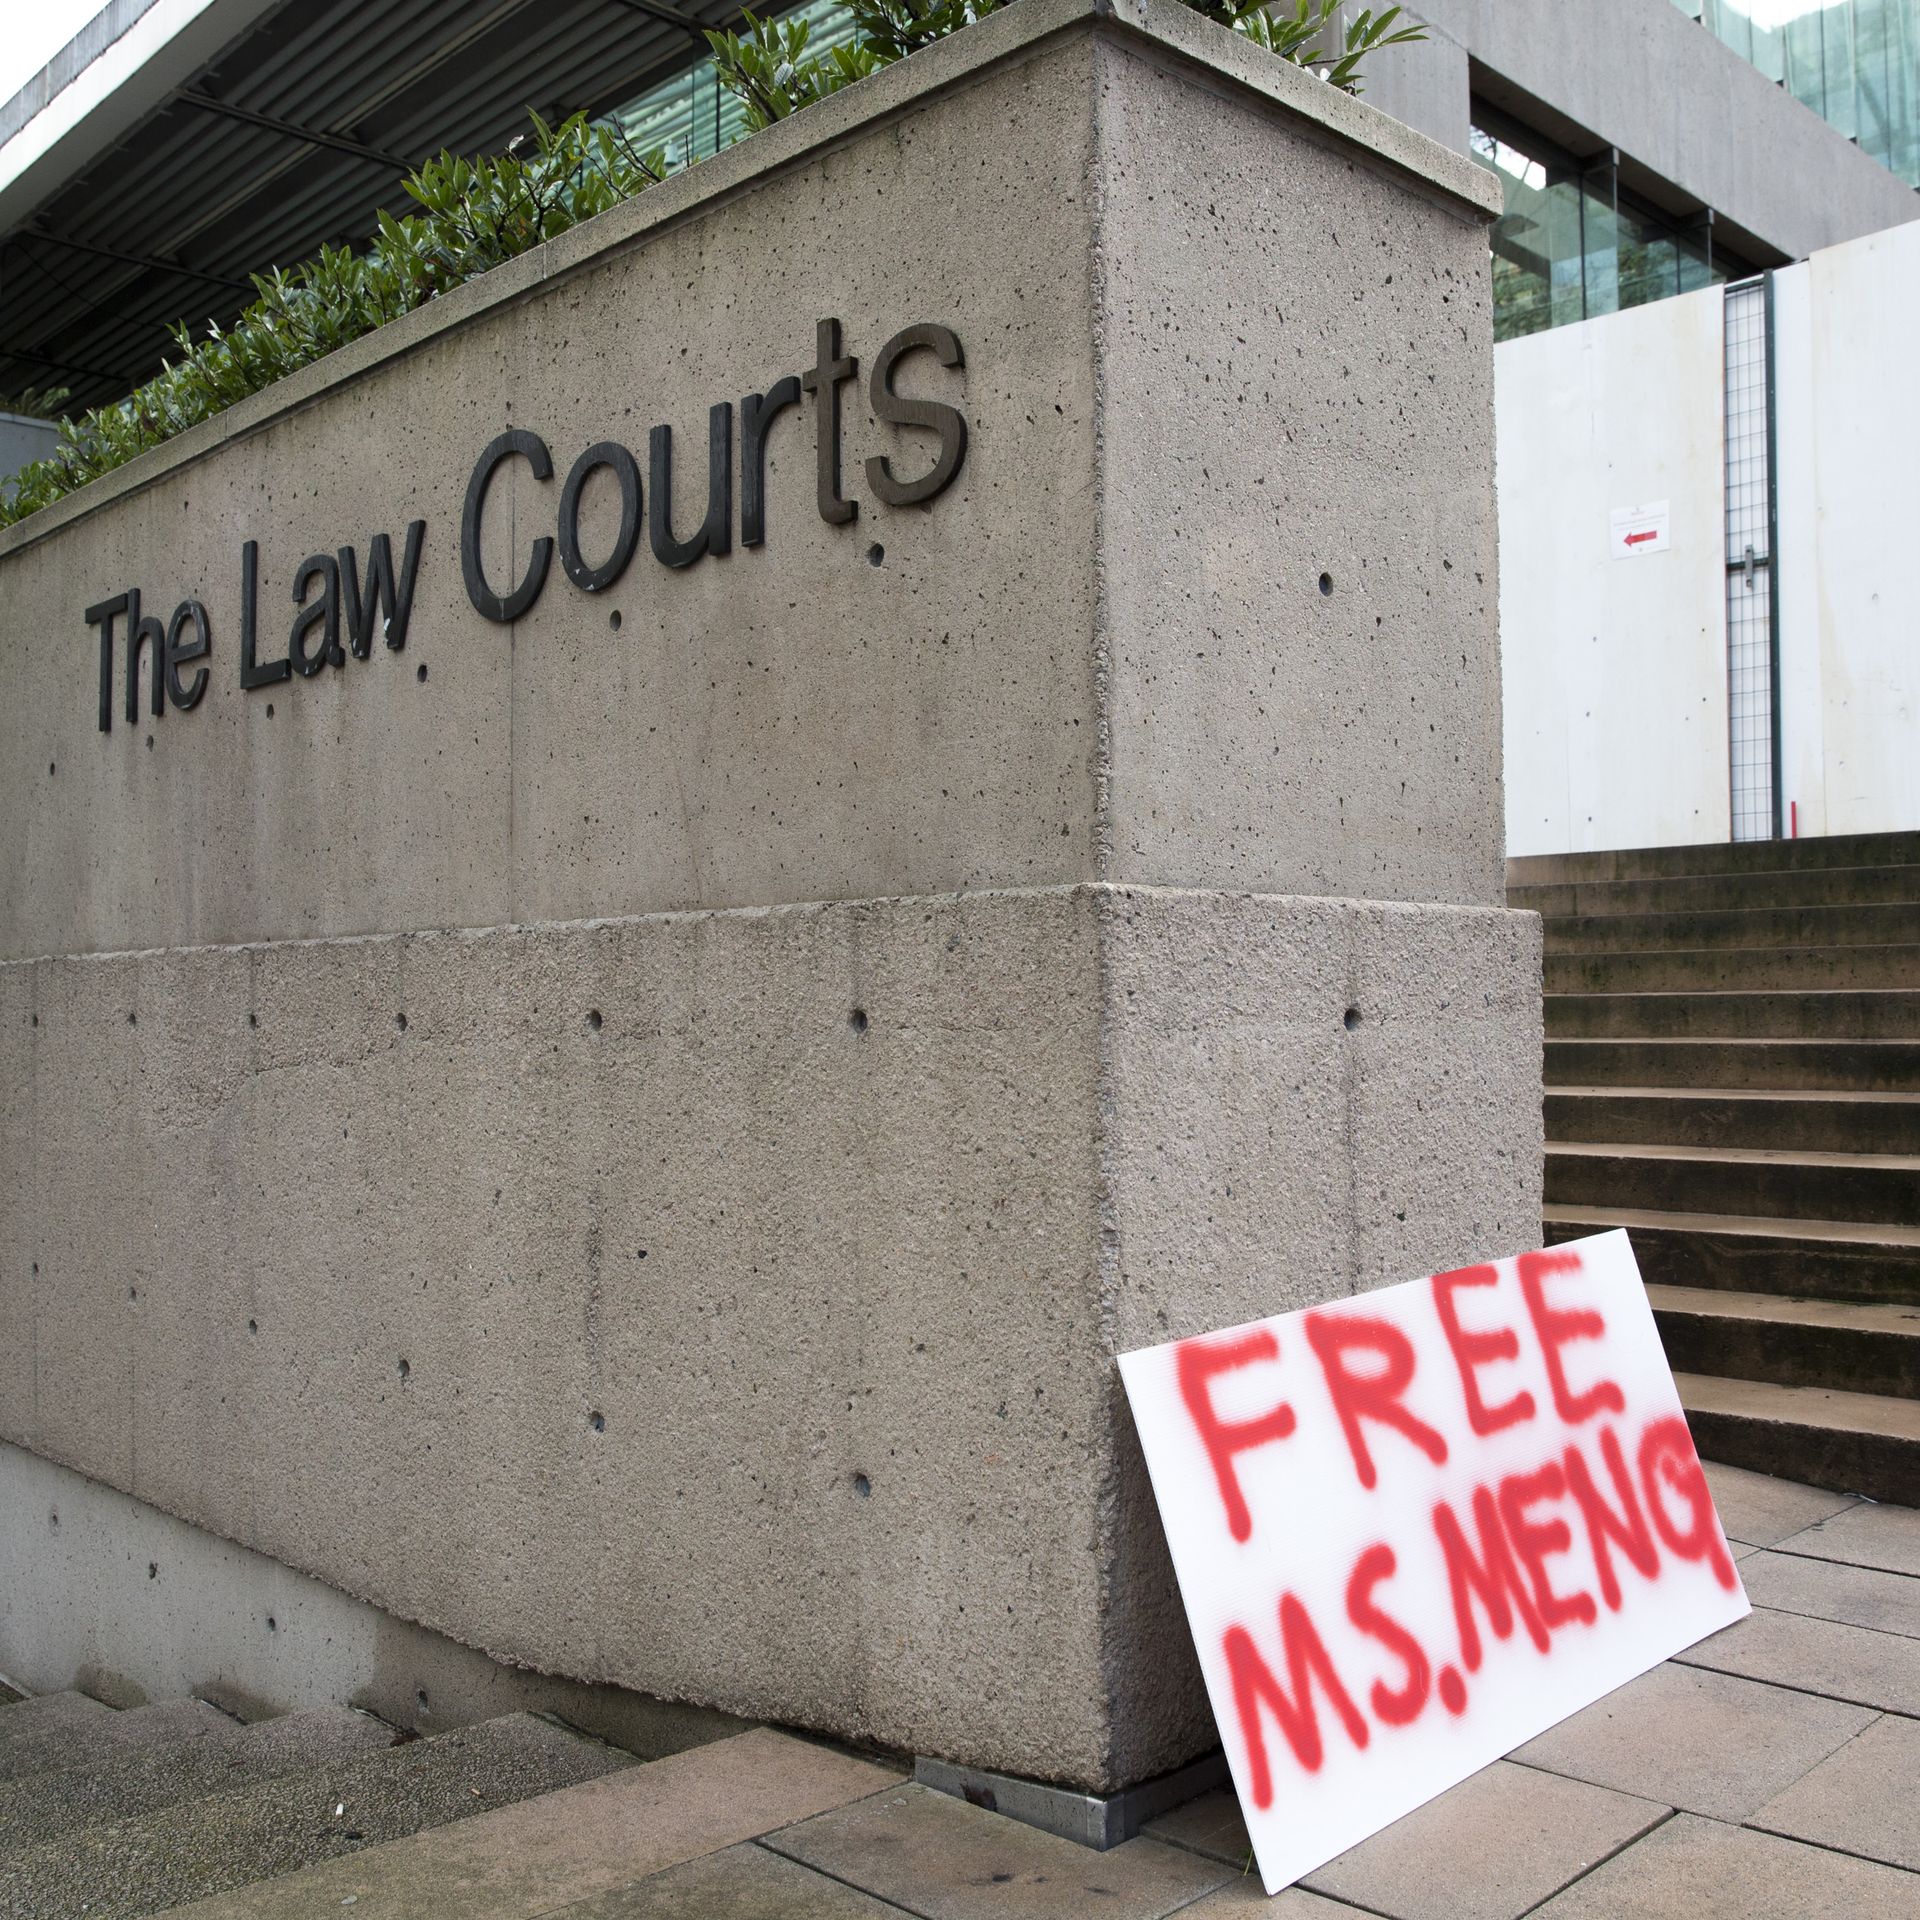 A sign calling for the release of Huawei Technologies Chief Financial Officer Meng Wanzhou is seen outside at British Columbia Superior Courts following her December 1 arrest in Canada 